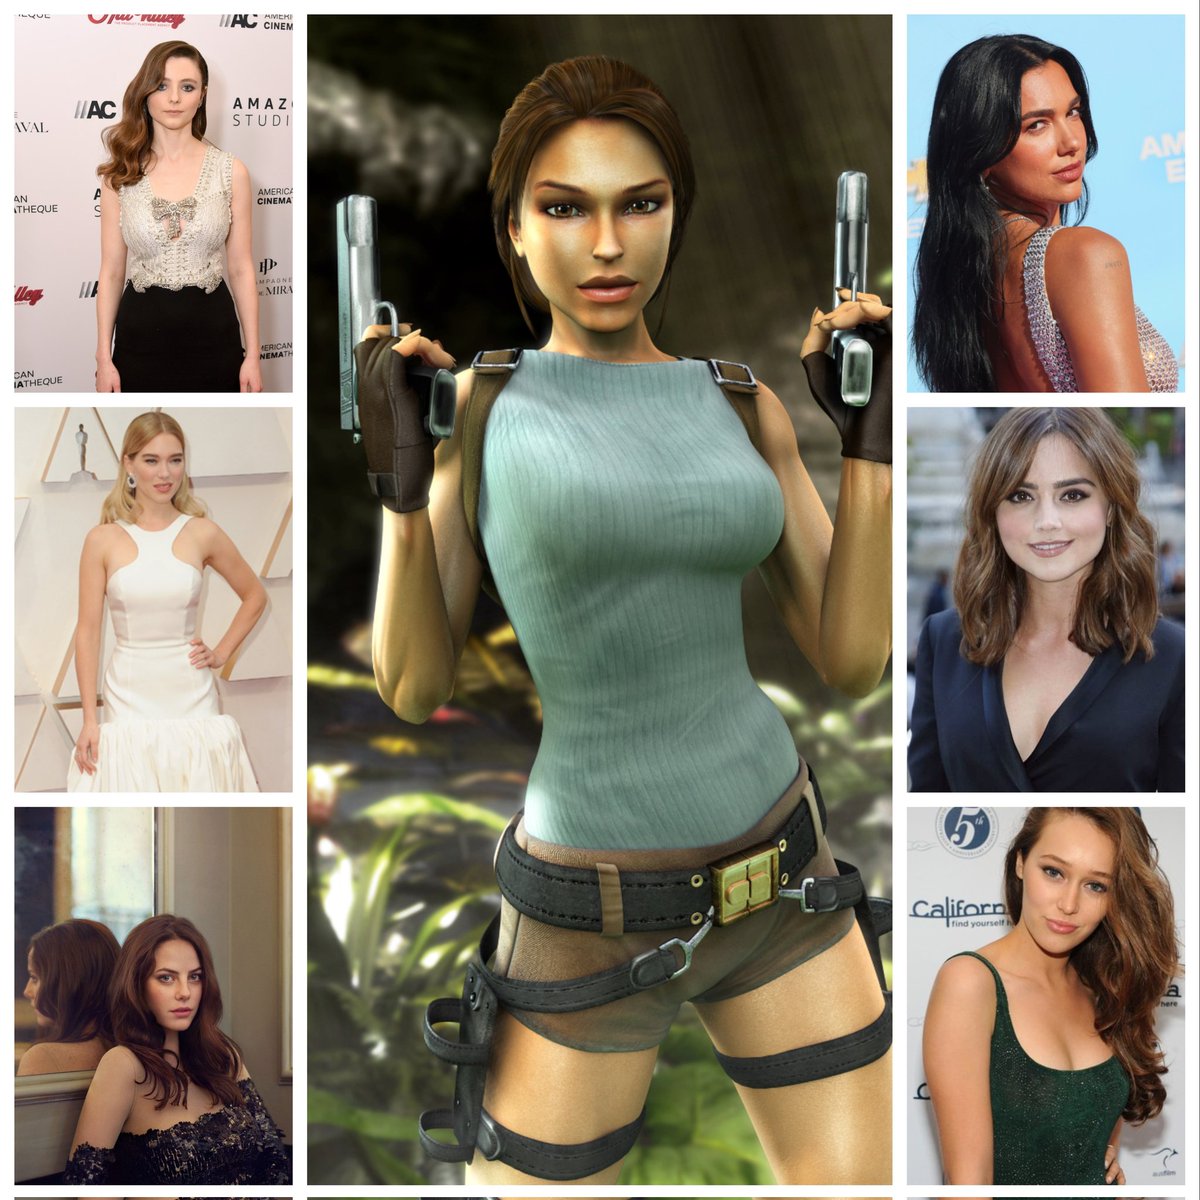 here's my next picks for who should be #LaraCroft in the #TombRaiderRebootMovie, I nominated #ThomasinMcKenzie, #LeaSydoux, #KayaScodelario, @DUALIPA, @Jenna_Coleman_ or @DebnamCarey for the role. #TombRaiderMovie #TombRaiderReboot #TombRaider